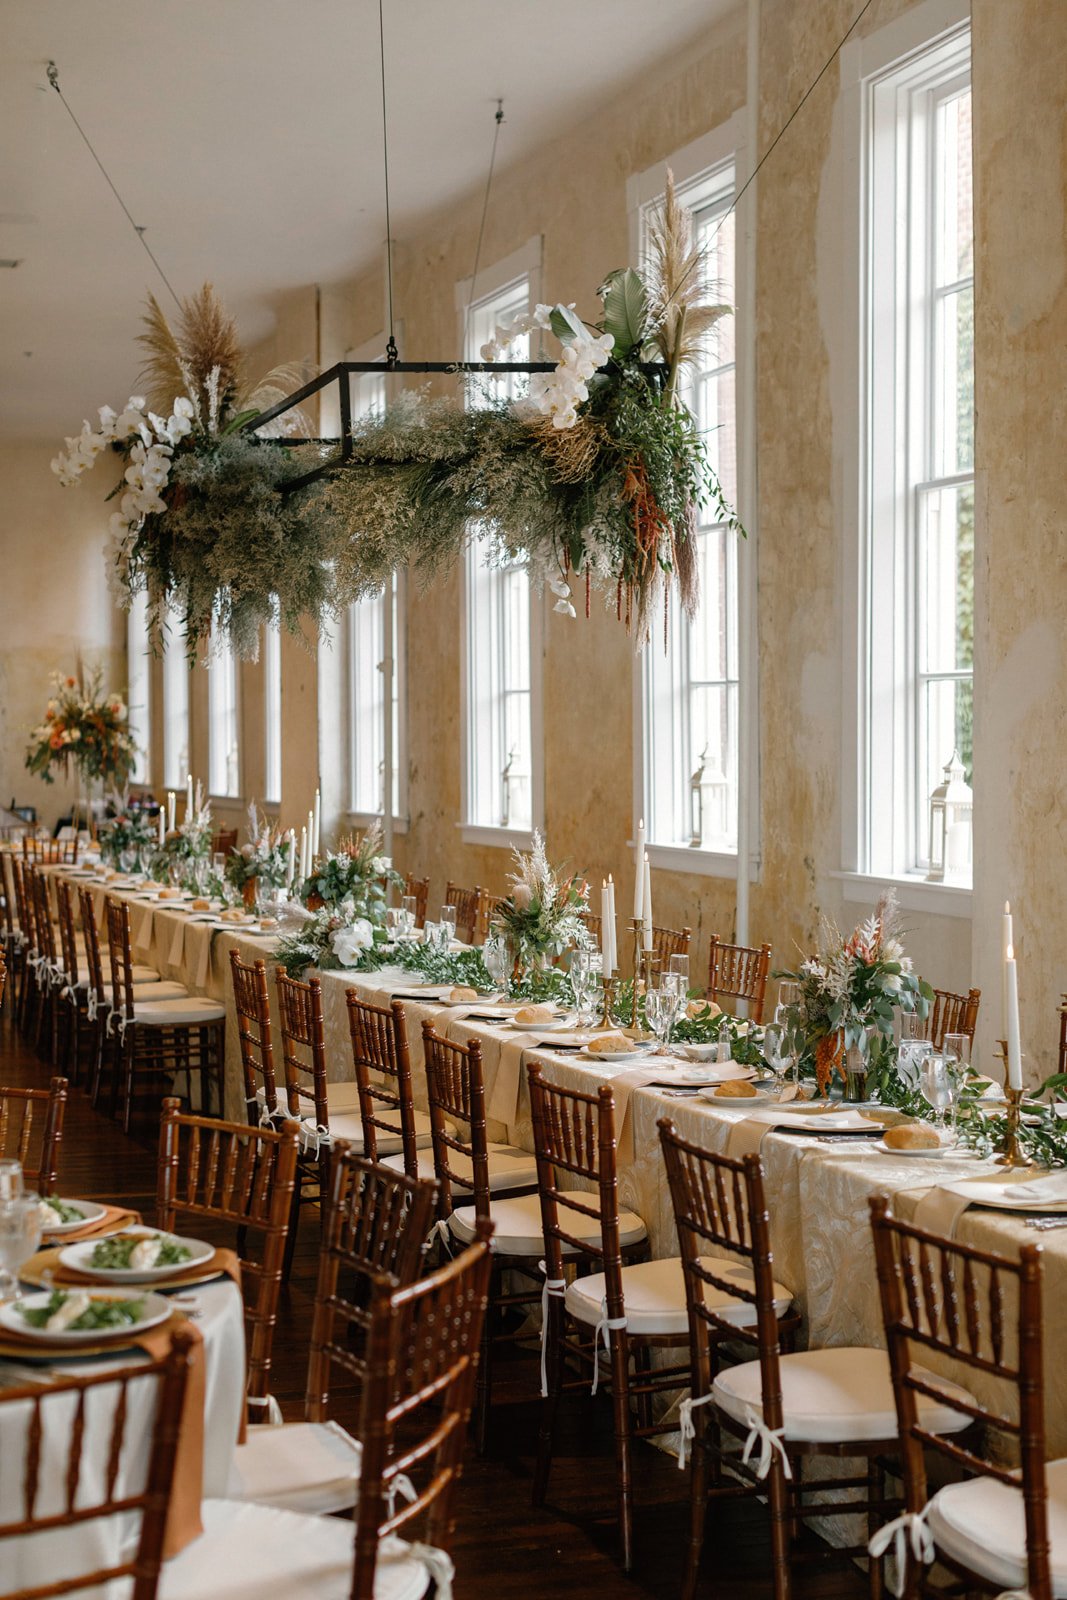 Brightly lit dinner tables of wedding reception greenery